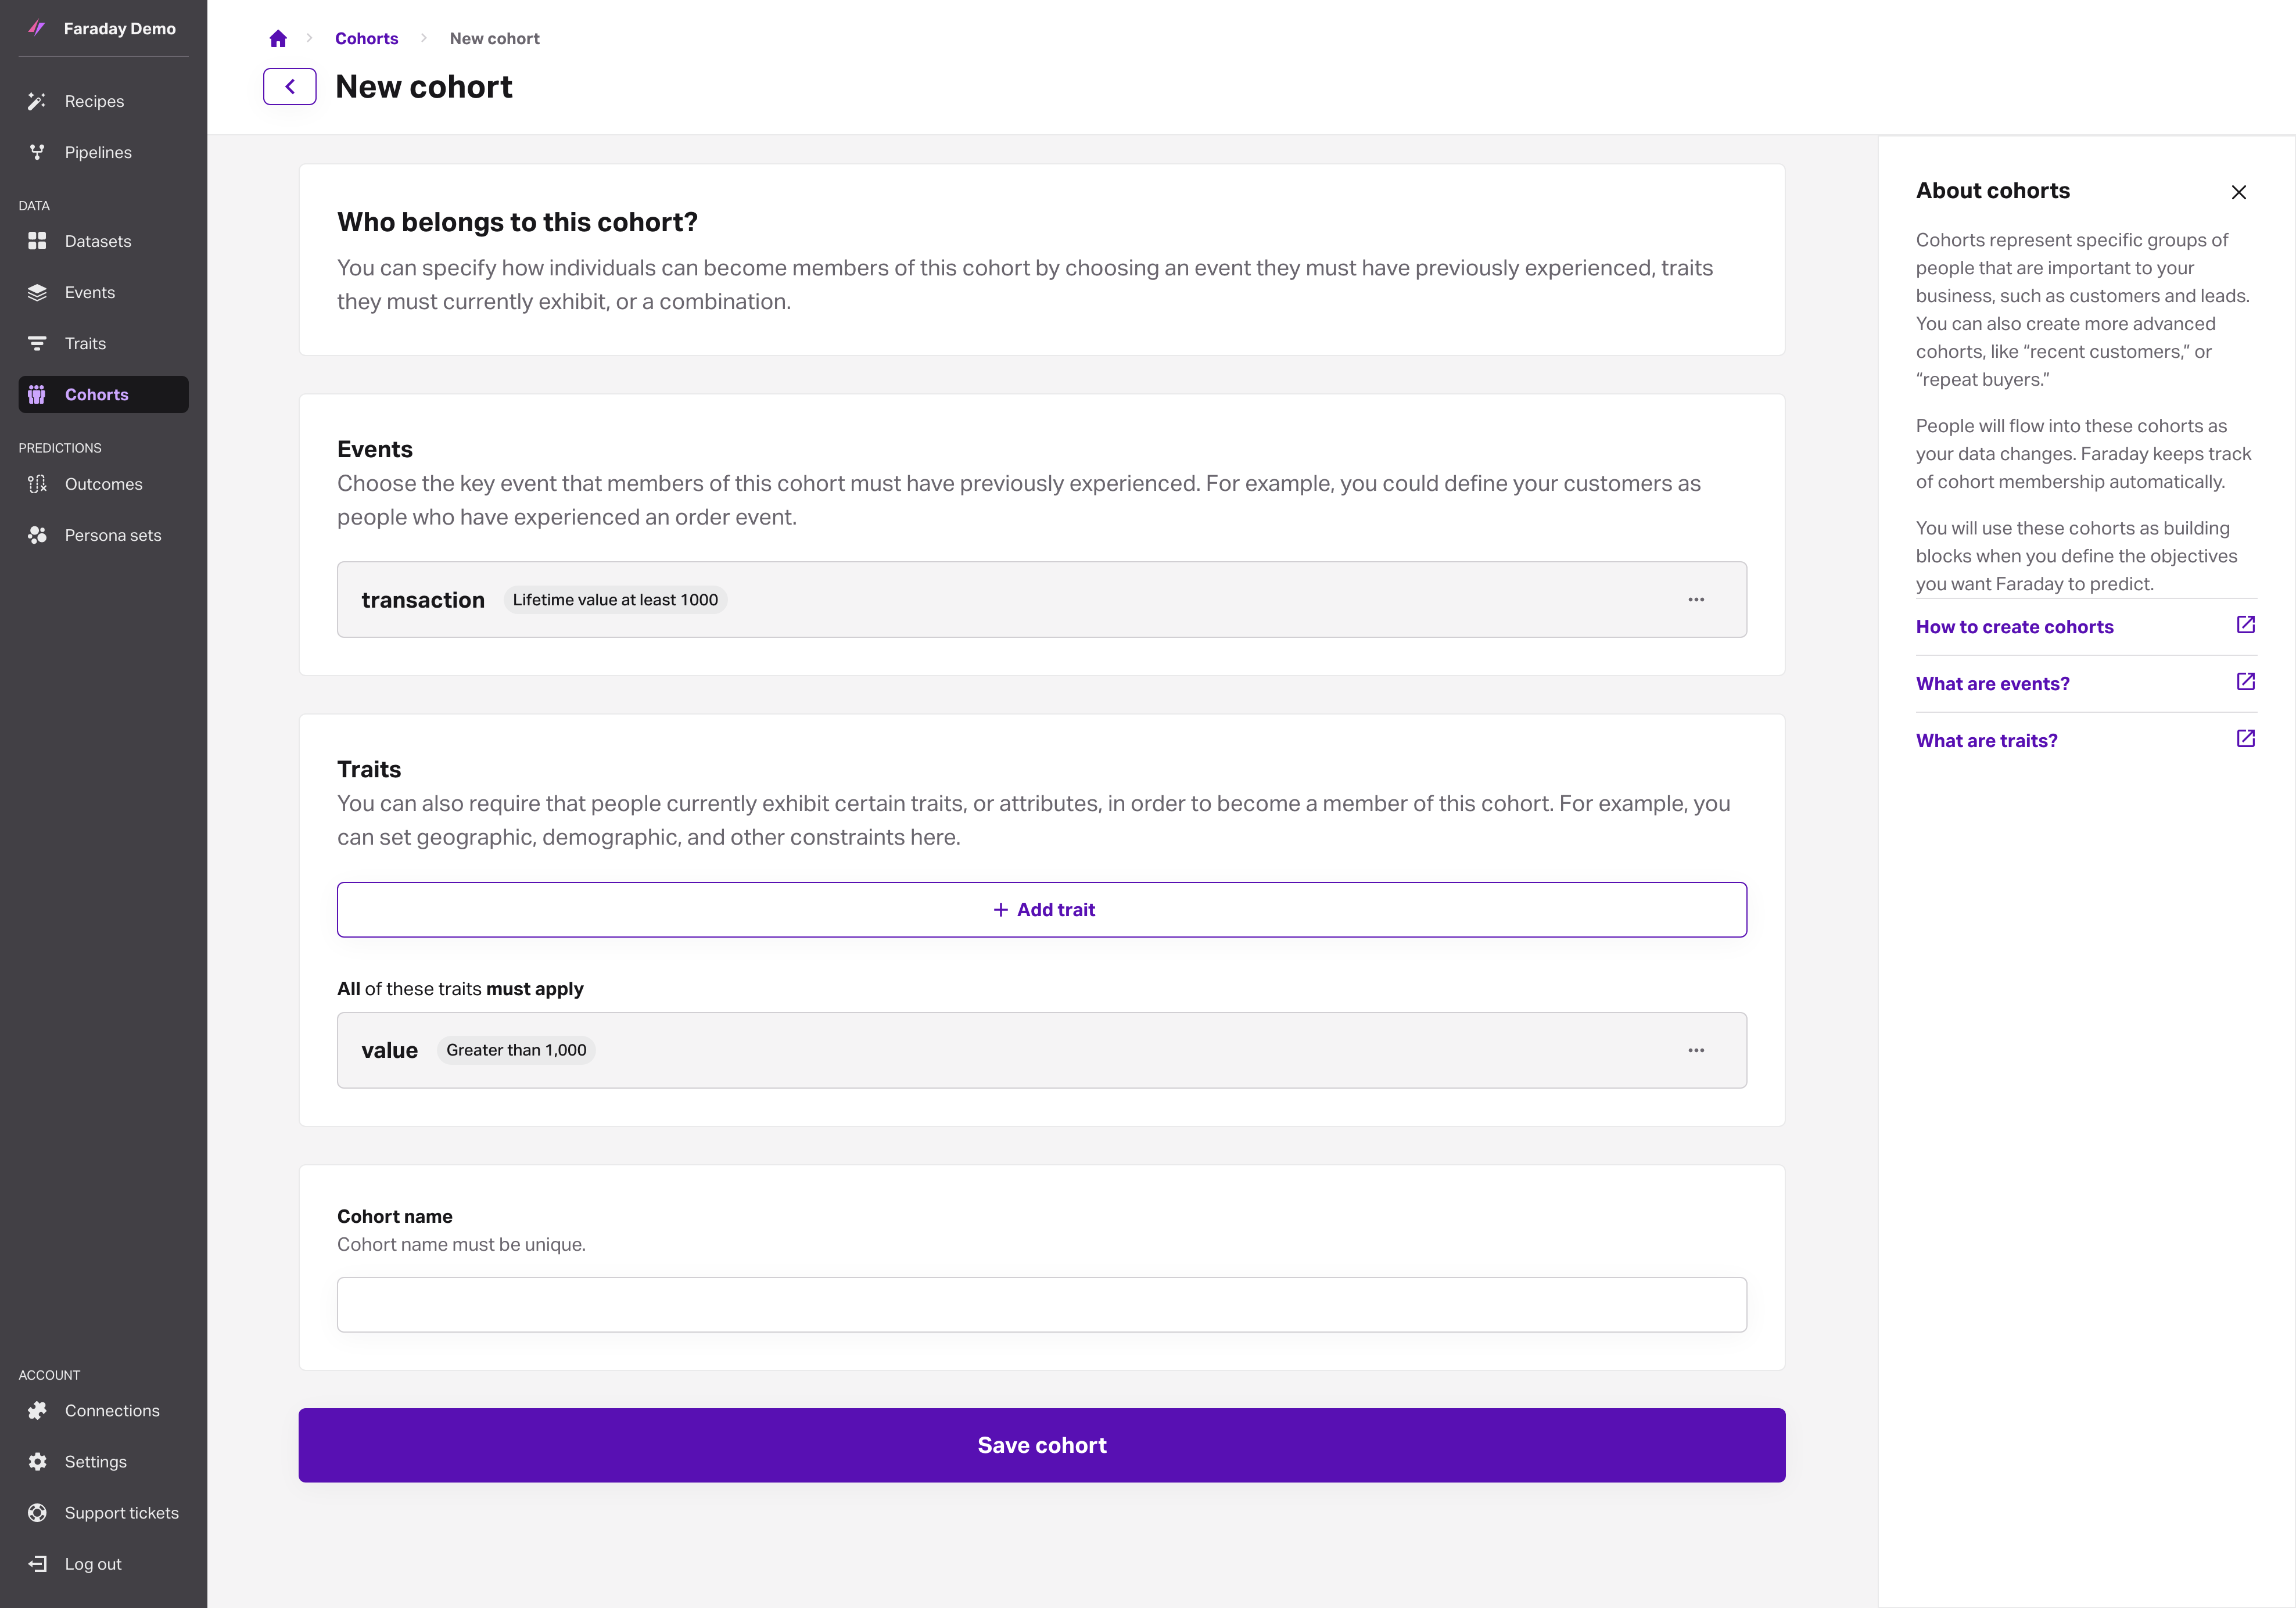 Screenshot of the new cohort form filled out